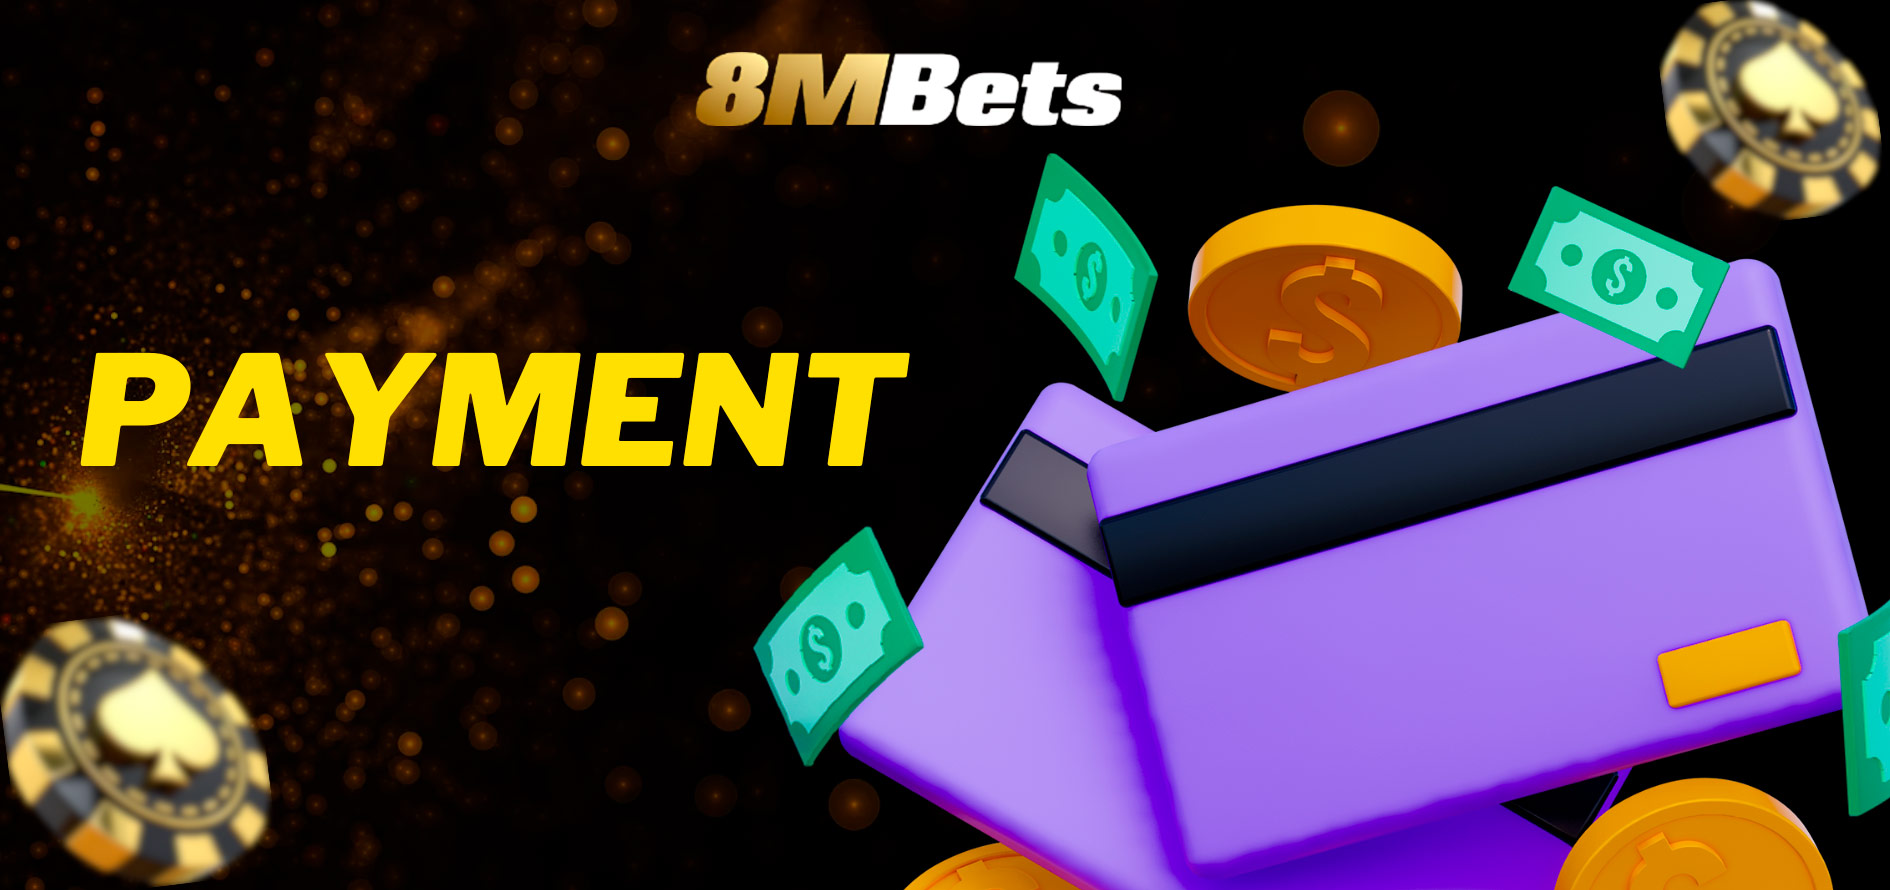 Secure and Hassle-free Payment and Withdrawal Options at 8MBets